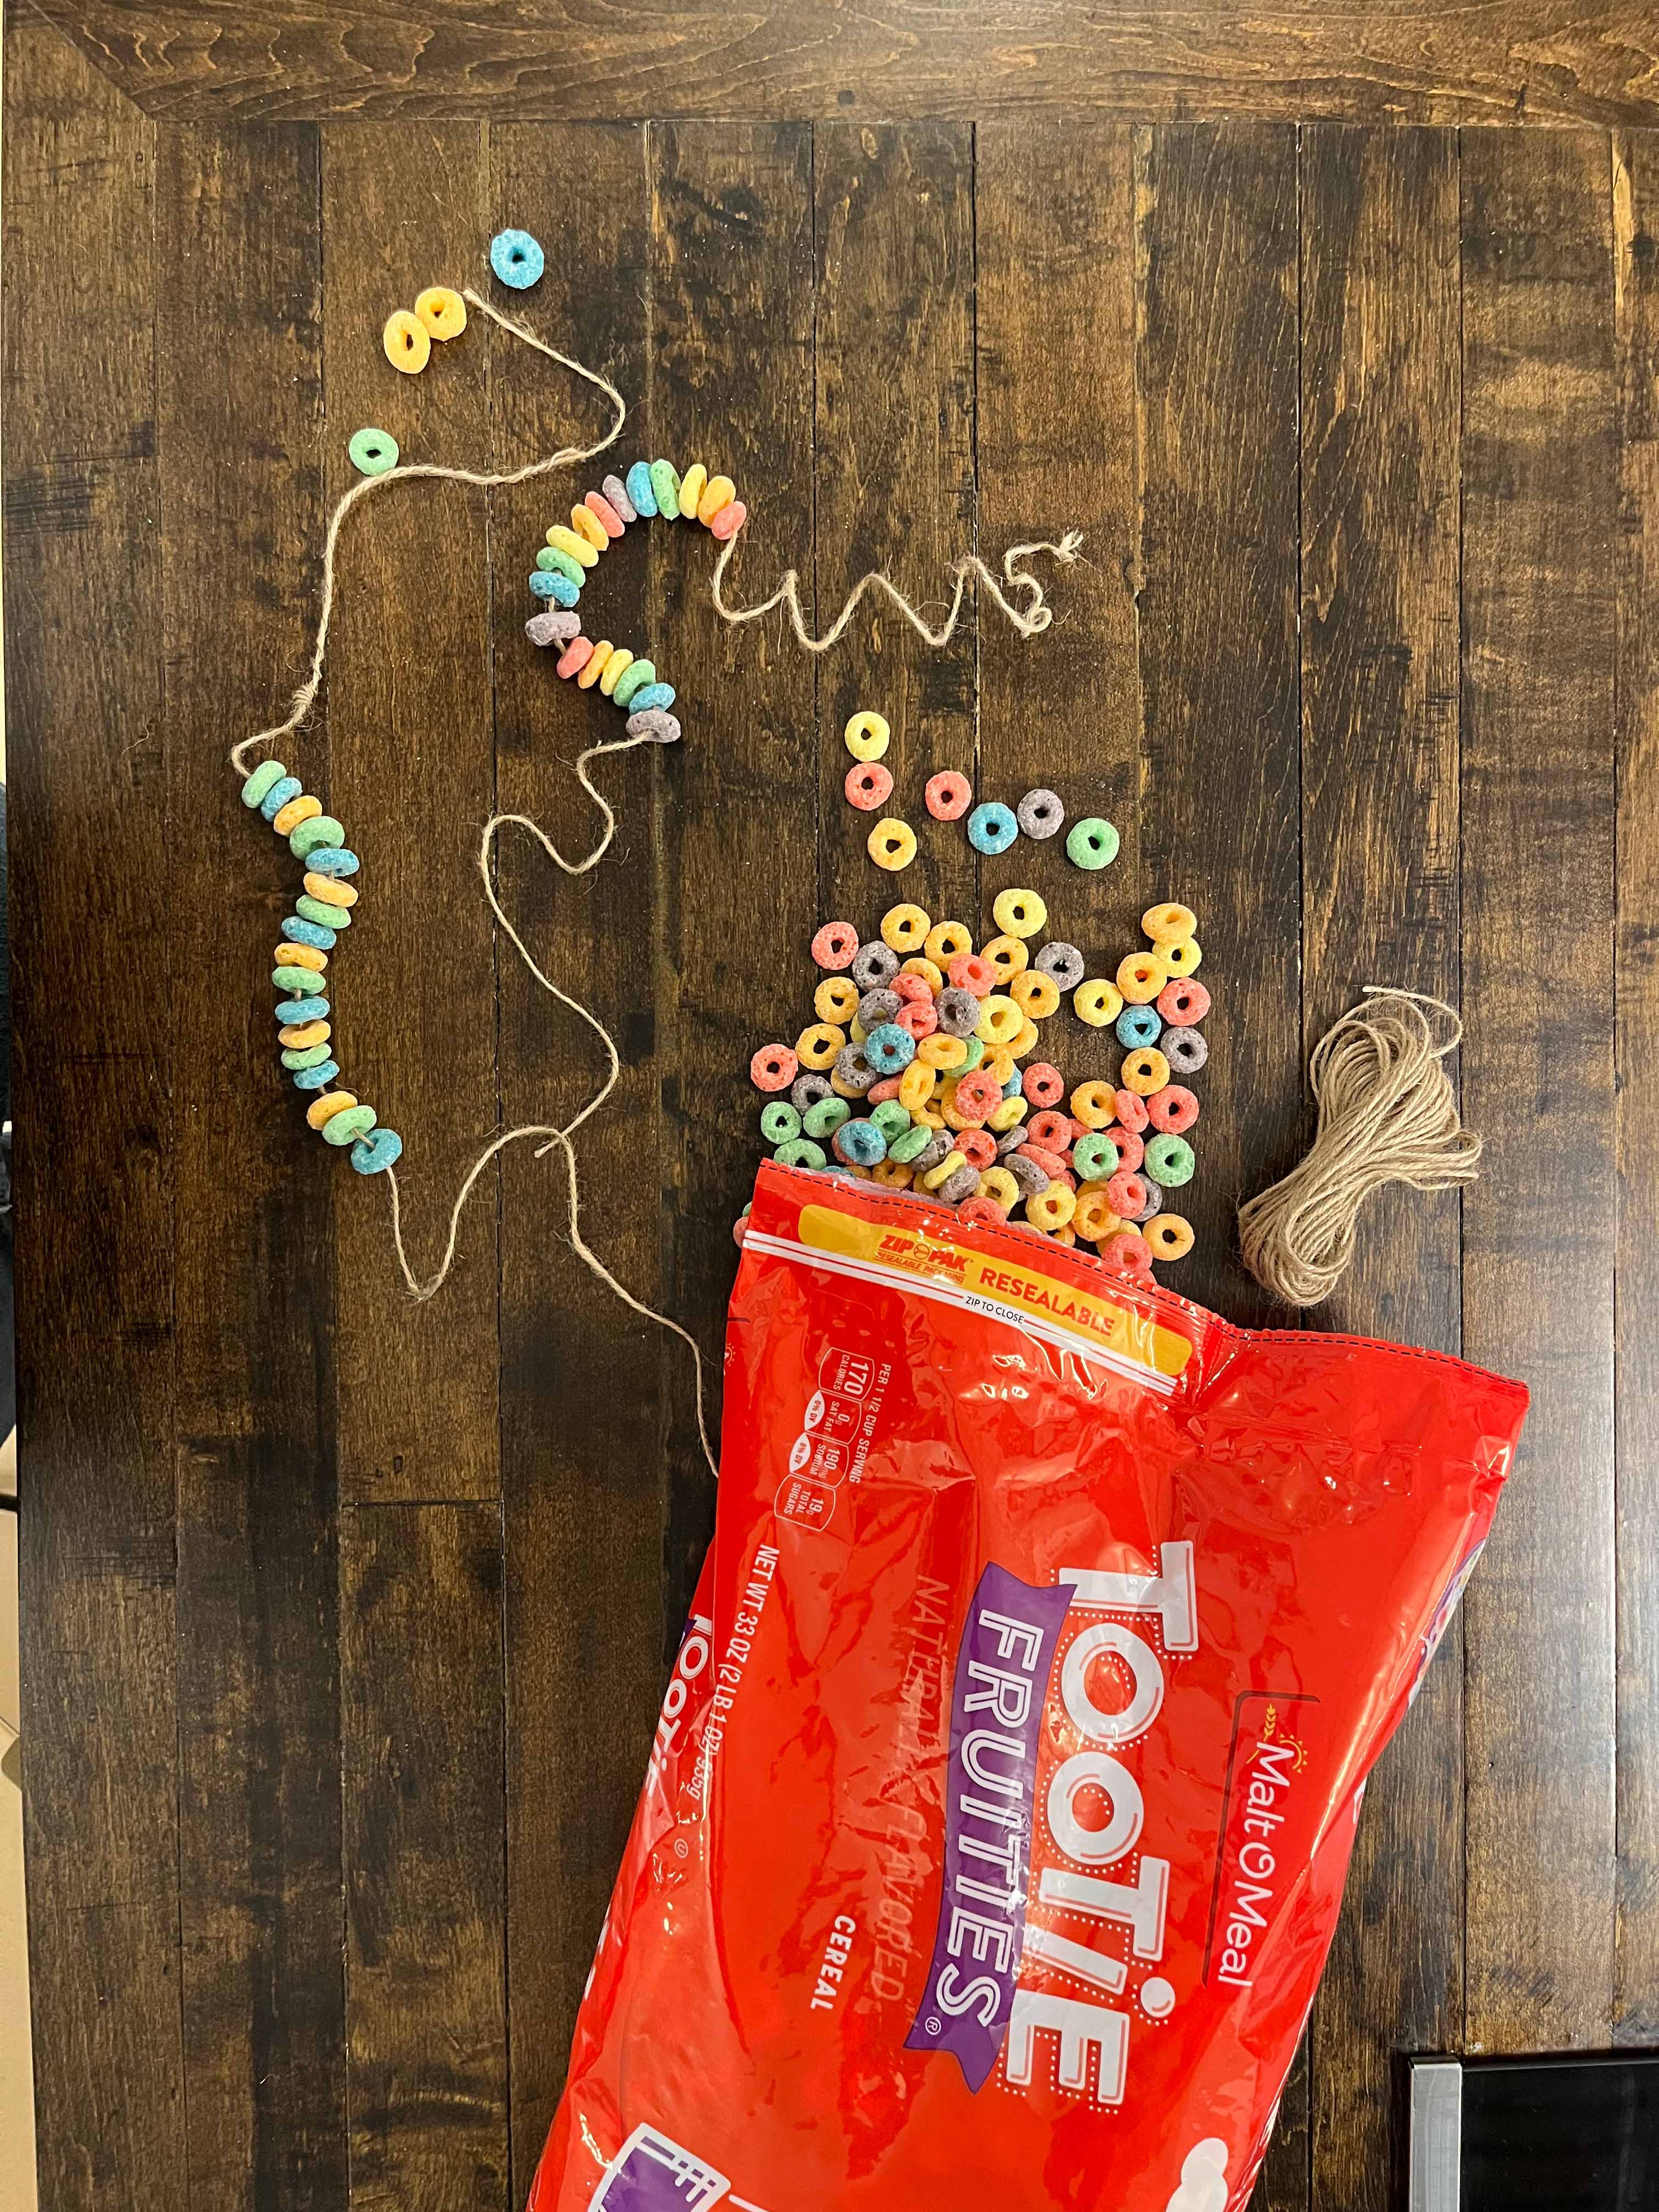 A necklace strung with Tootie Fruities cereal. An open bag of Tootie Fruities is nearby.